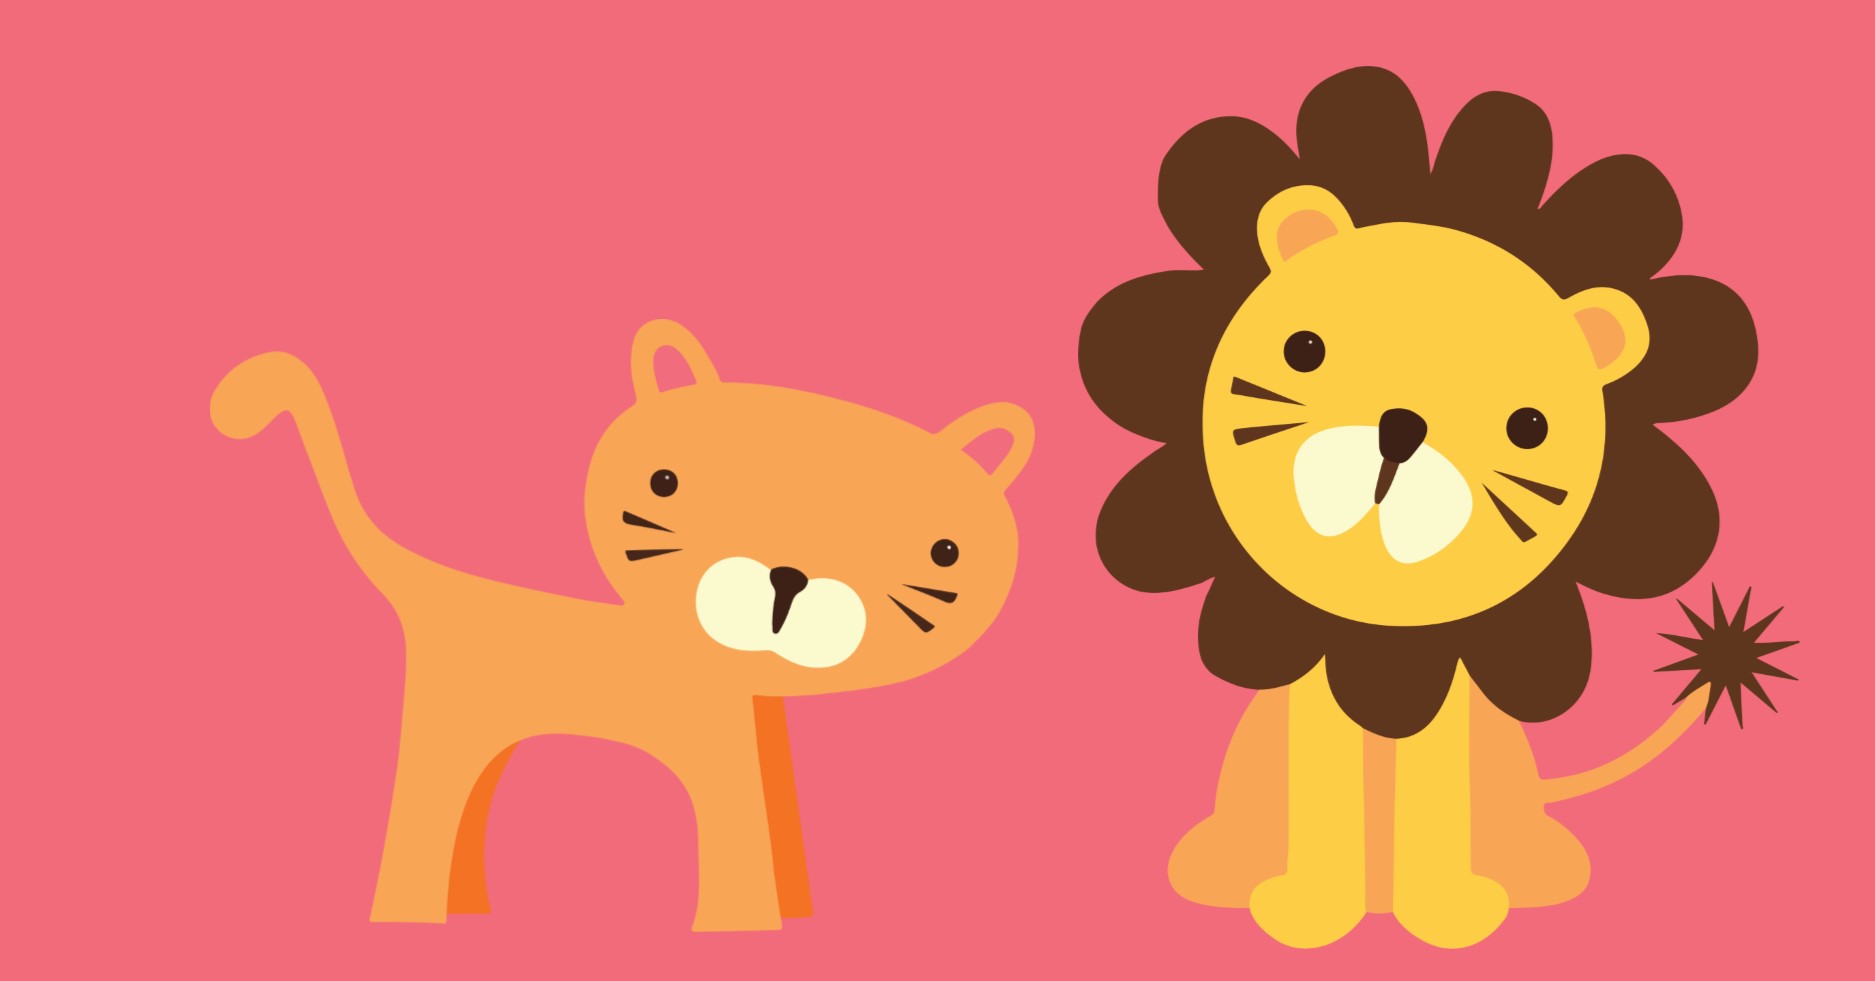 Toy tiger and lion on pink background